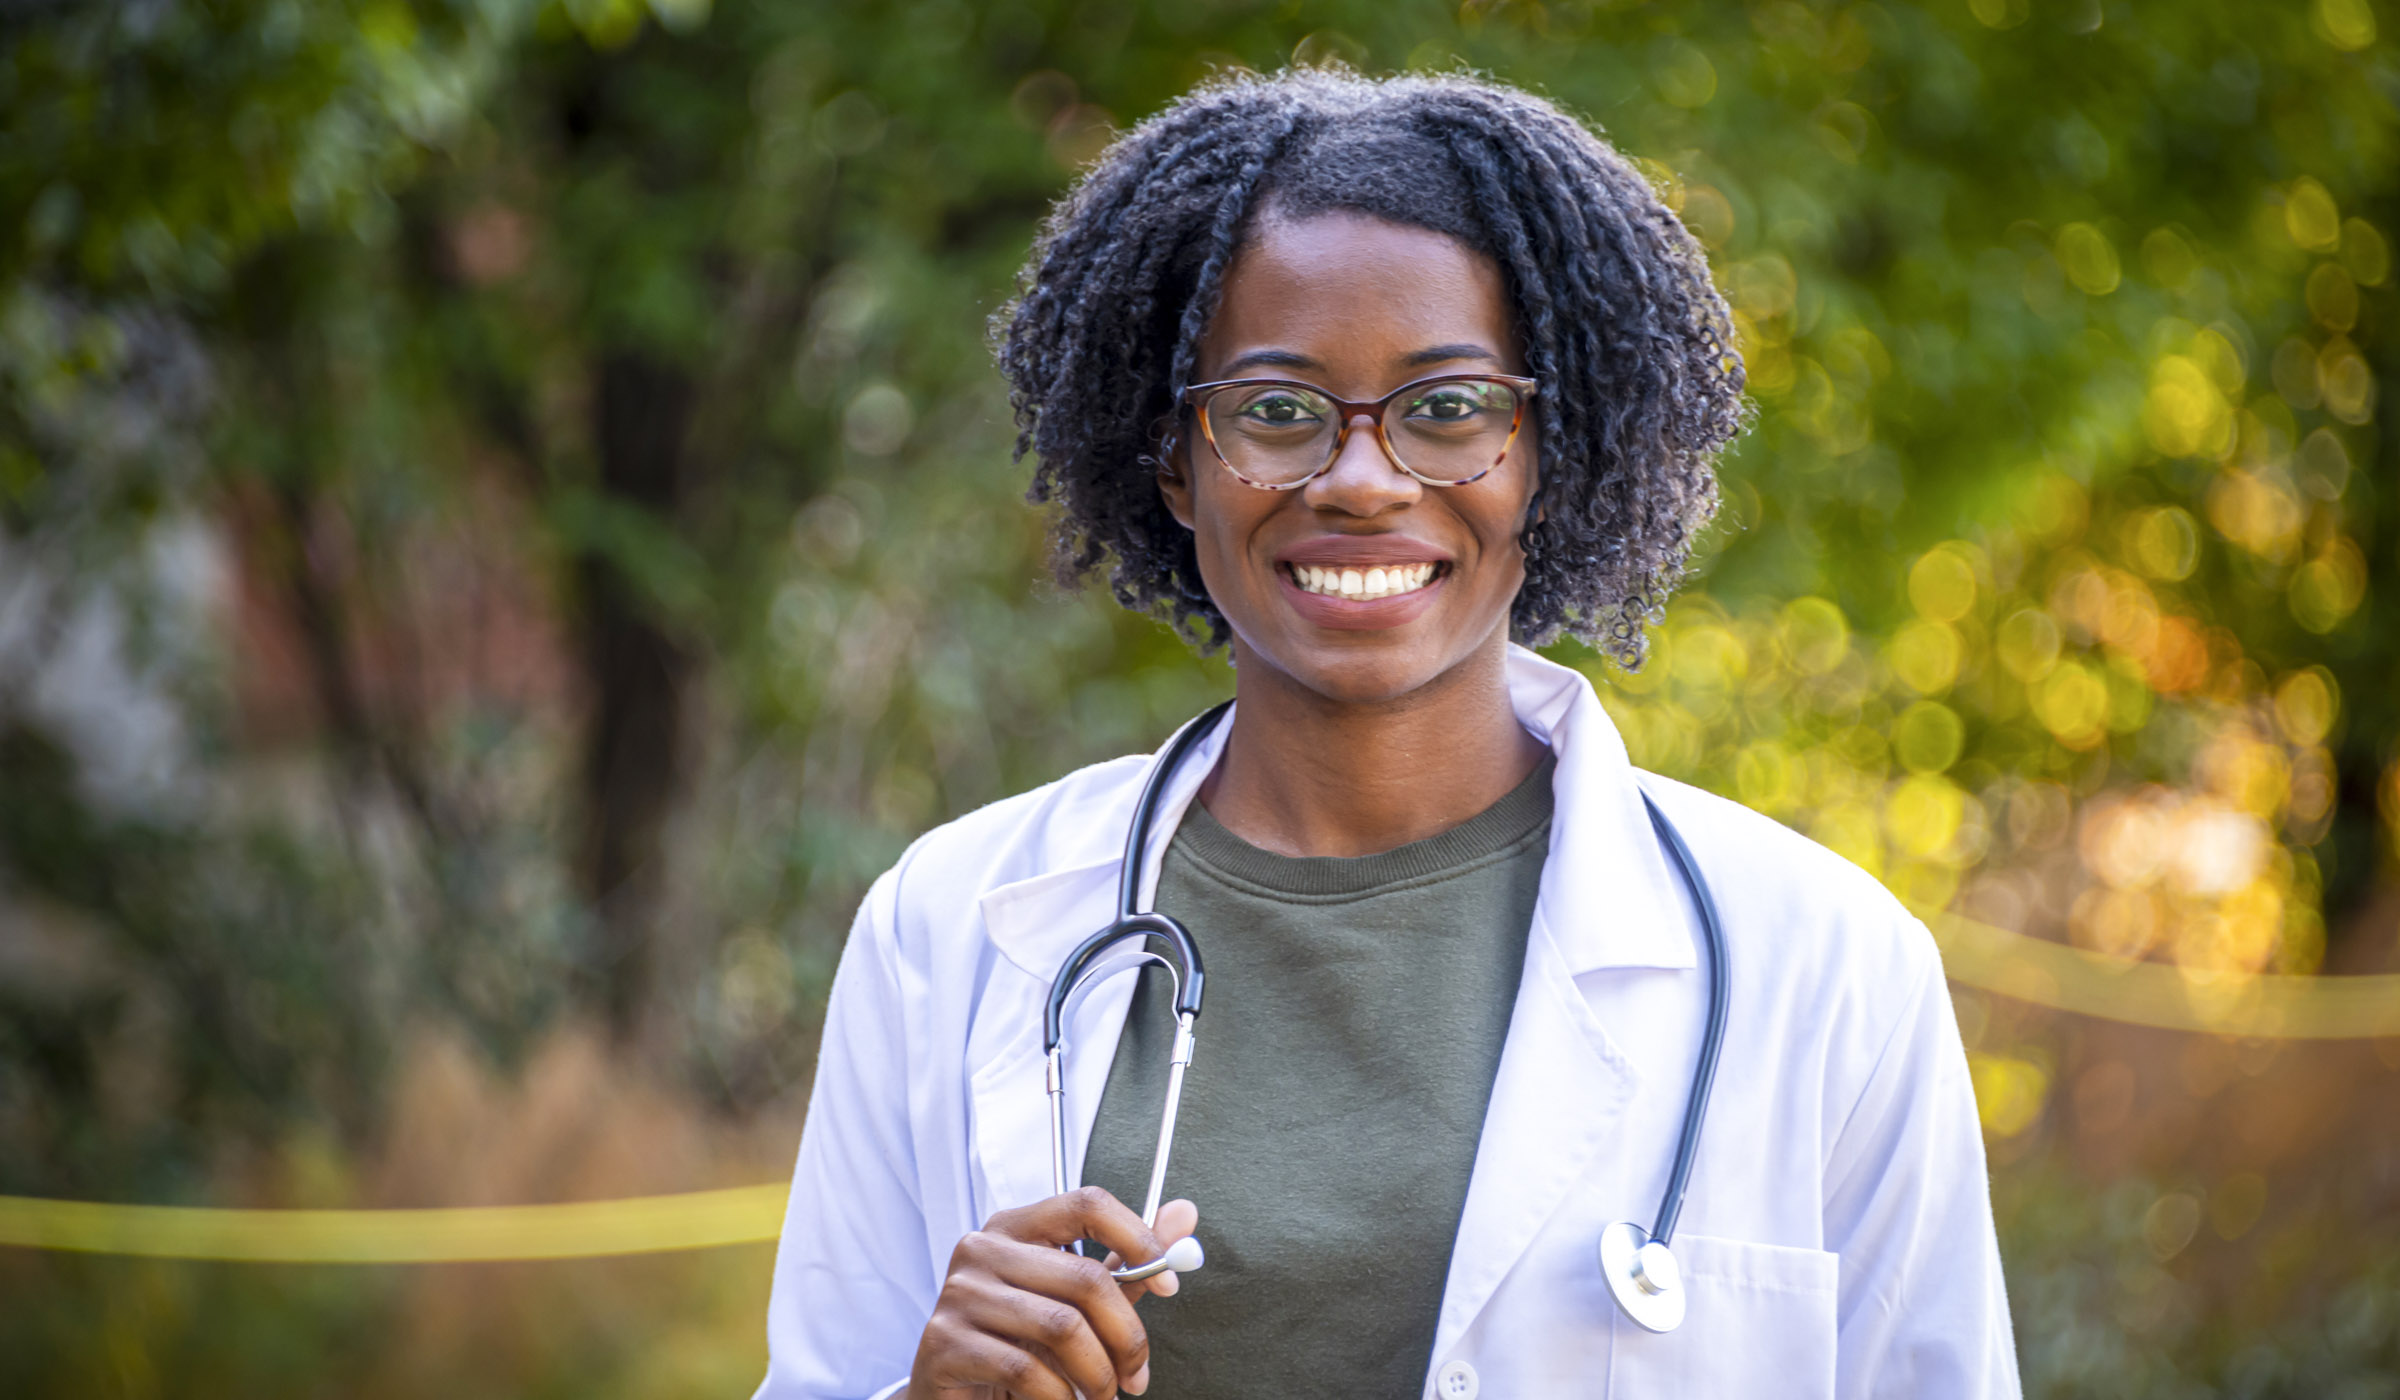 Marimba Williams, pictured in a lab coat outside and holding a stethoscope.